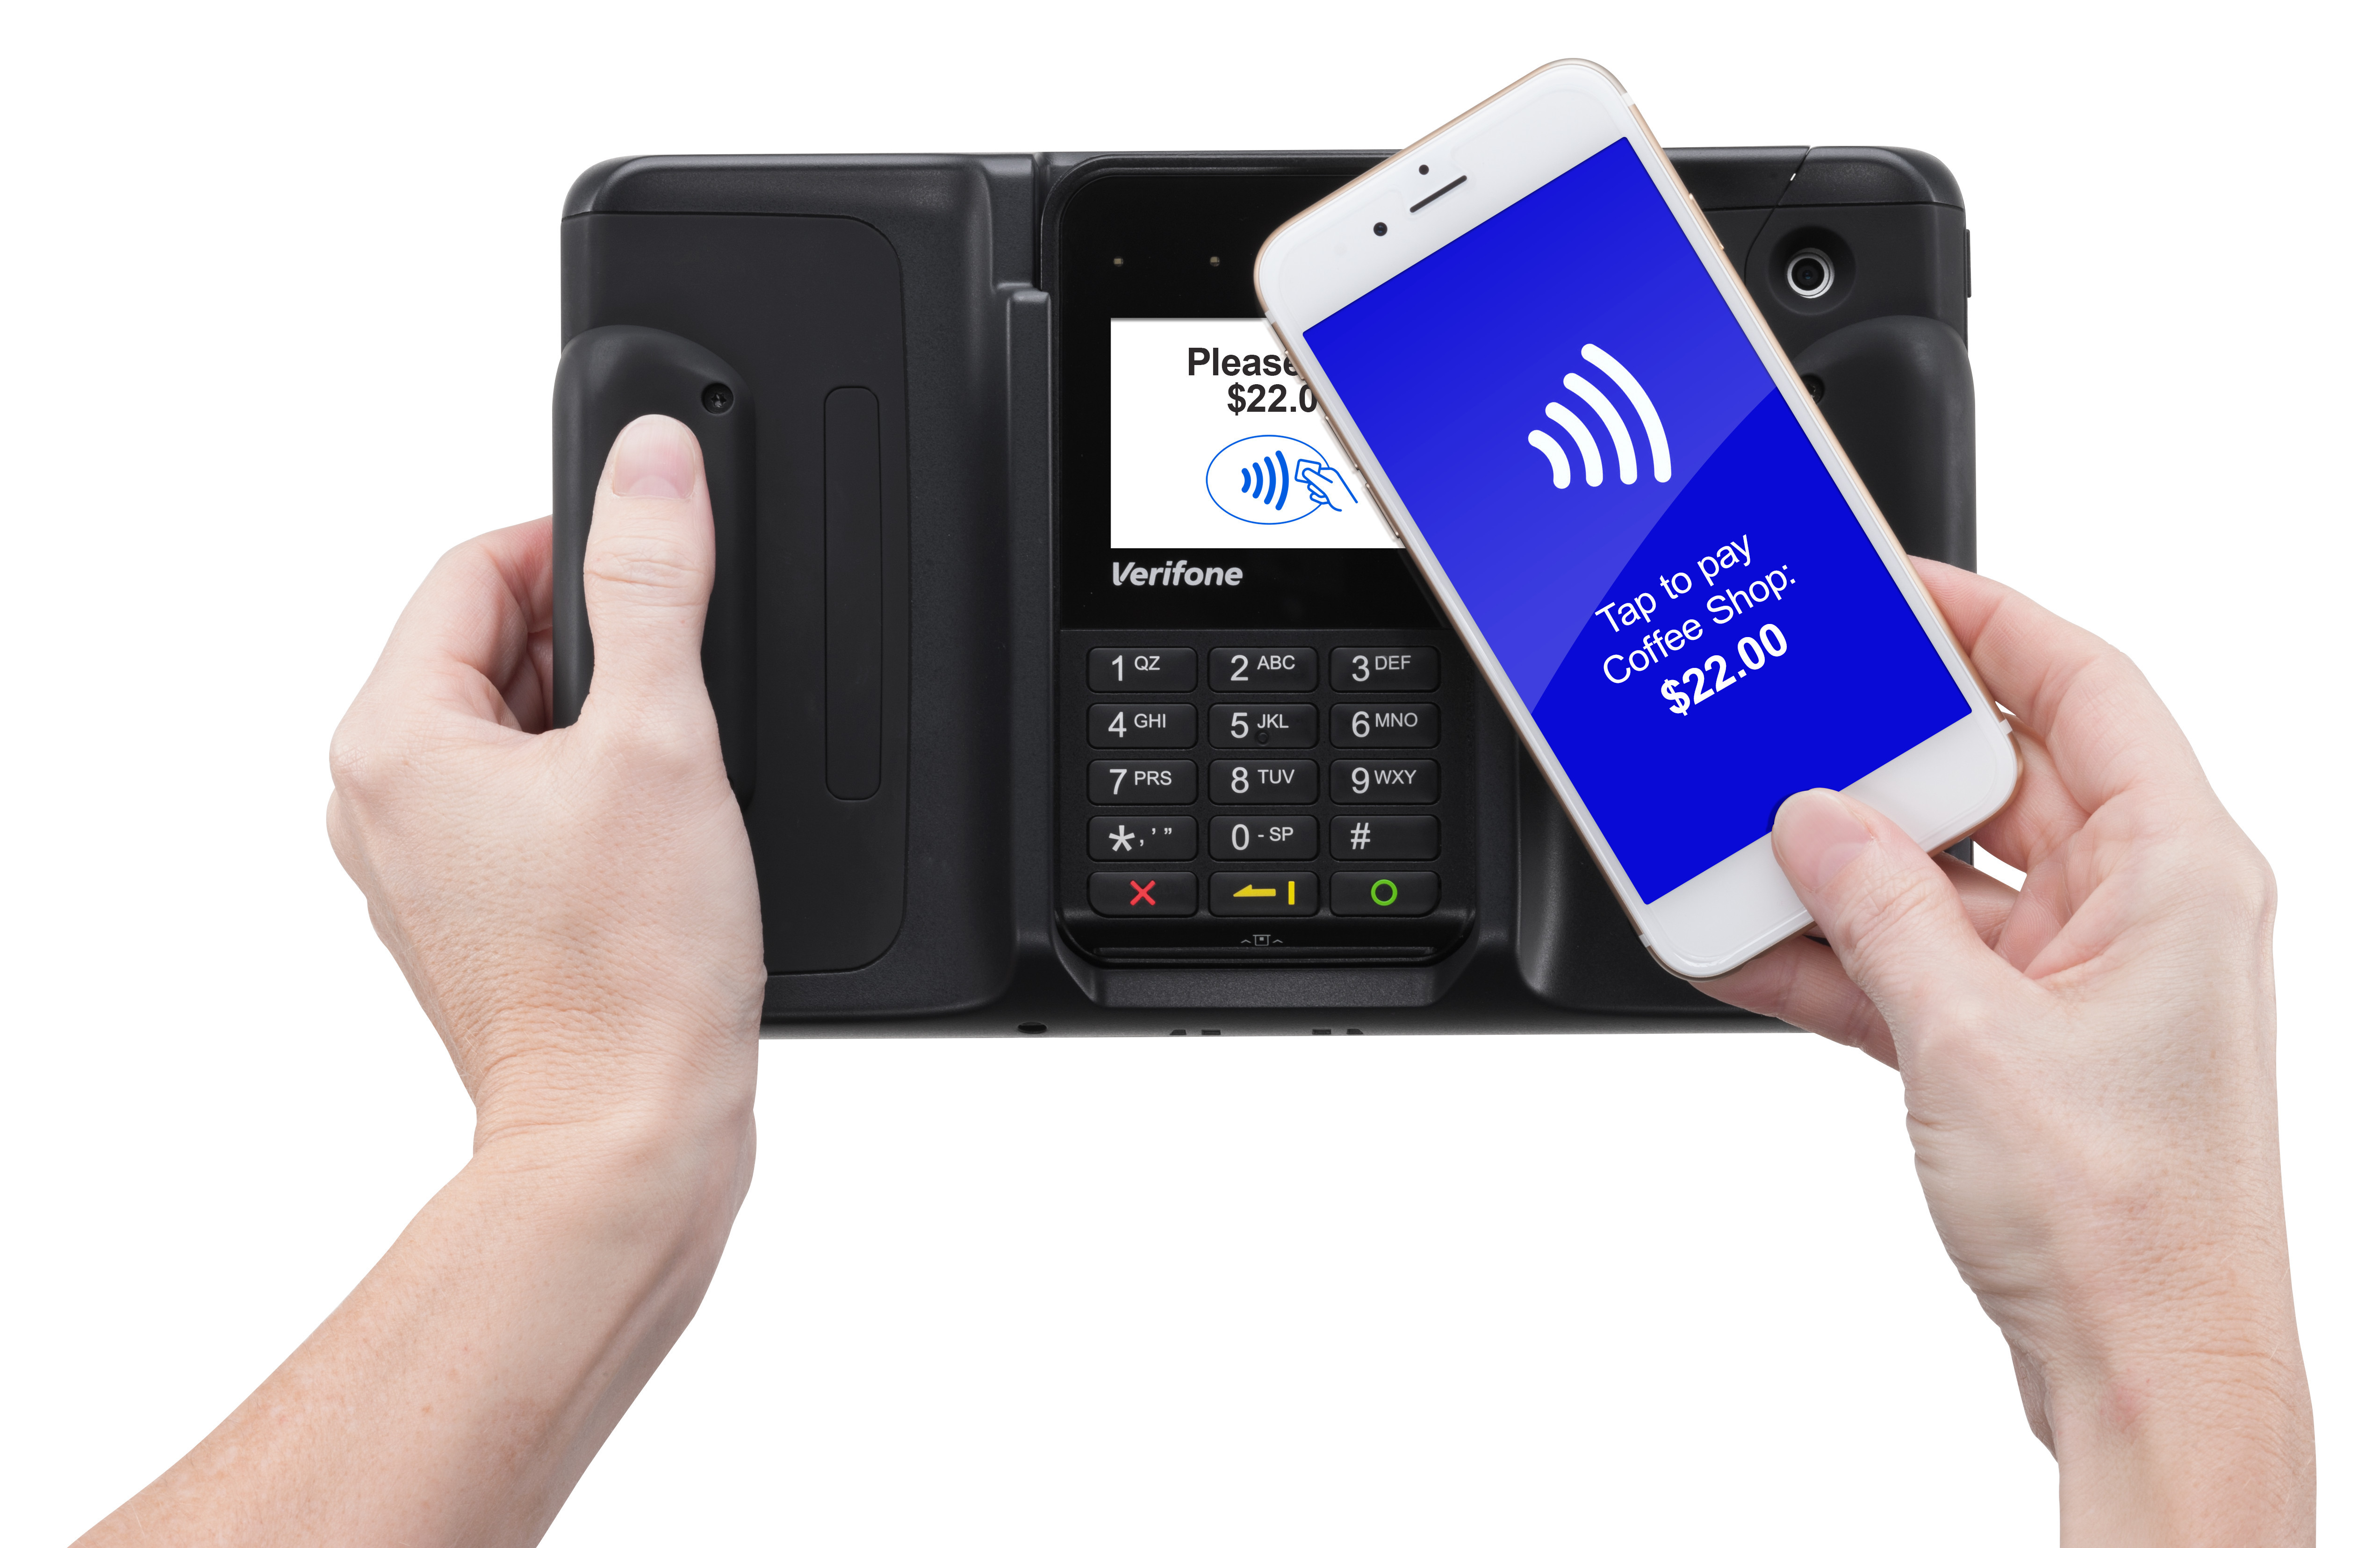 Verifone Offers Merchants A Single Mpos Payment Terminal To